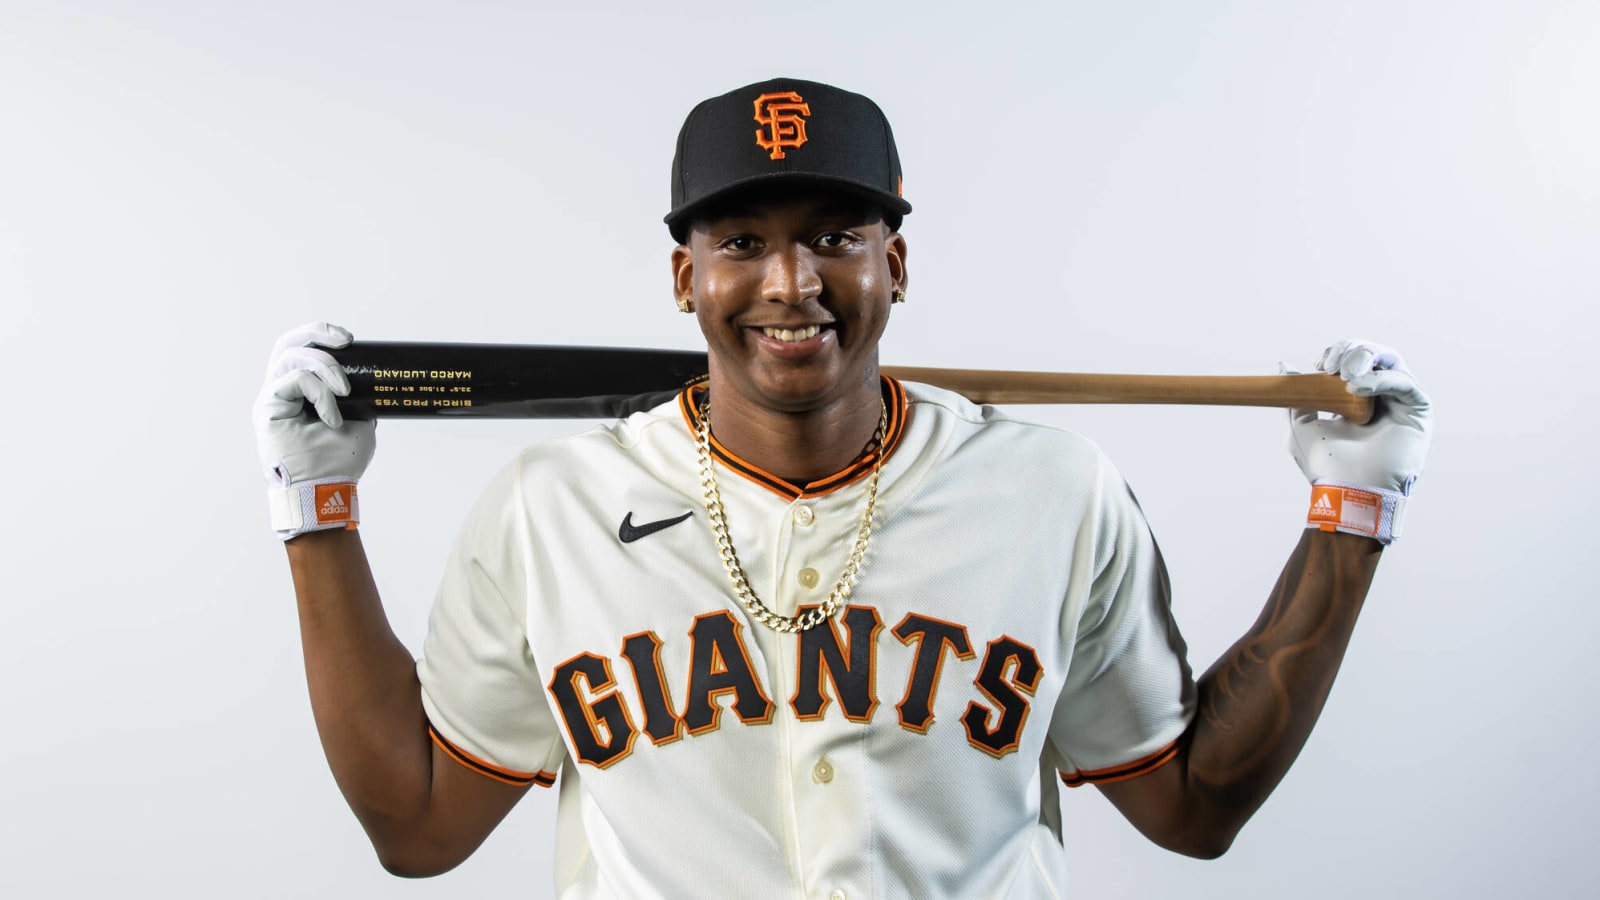 Giants call up top prospect as offense struggles